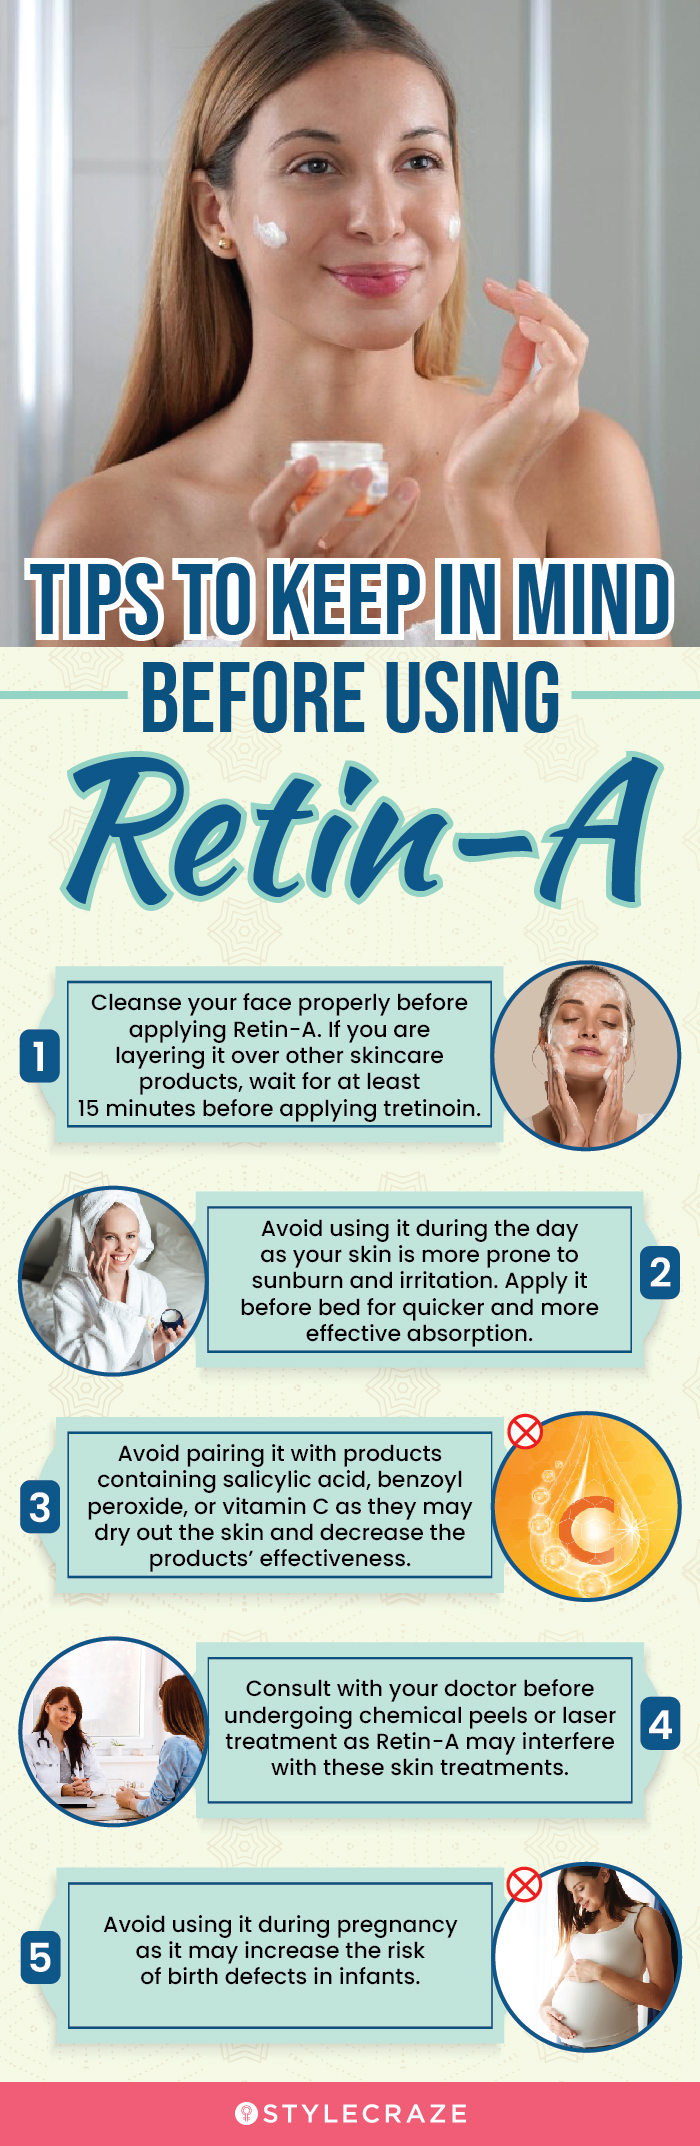 tips to keep in mind before using retin-a (infographic)